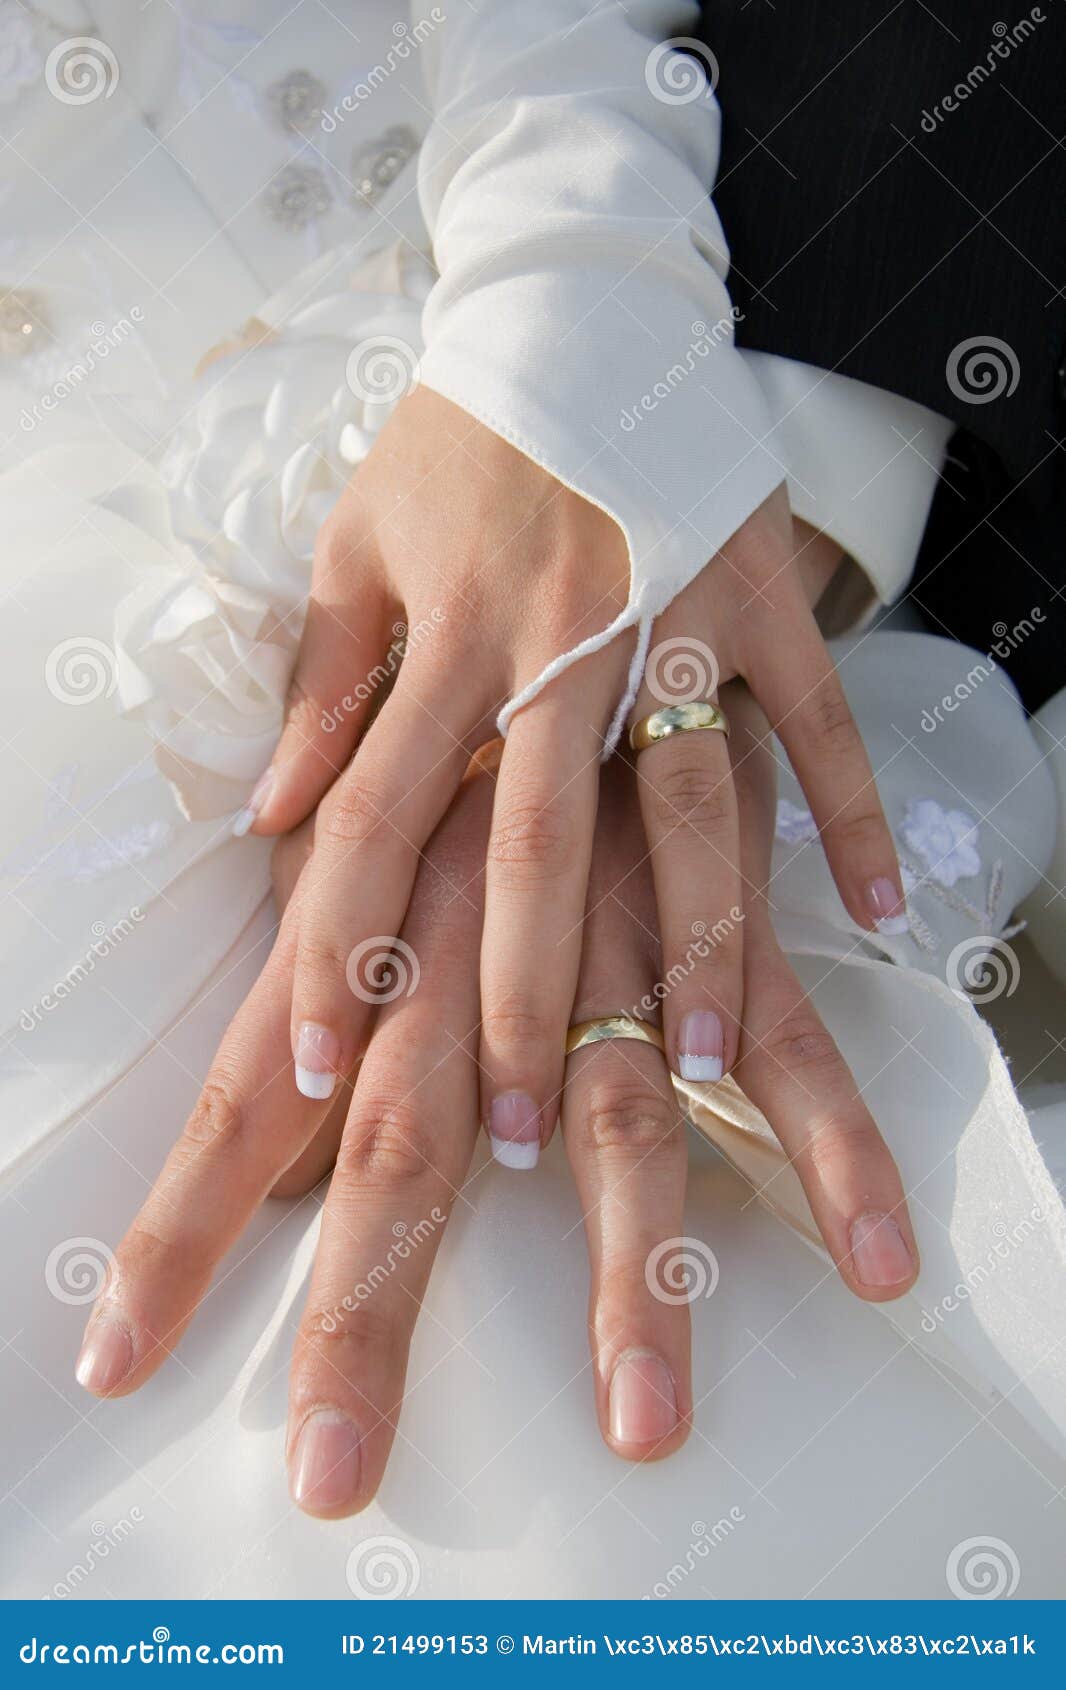 Couple is holding their hands together and showing off their rings ...